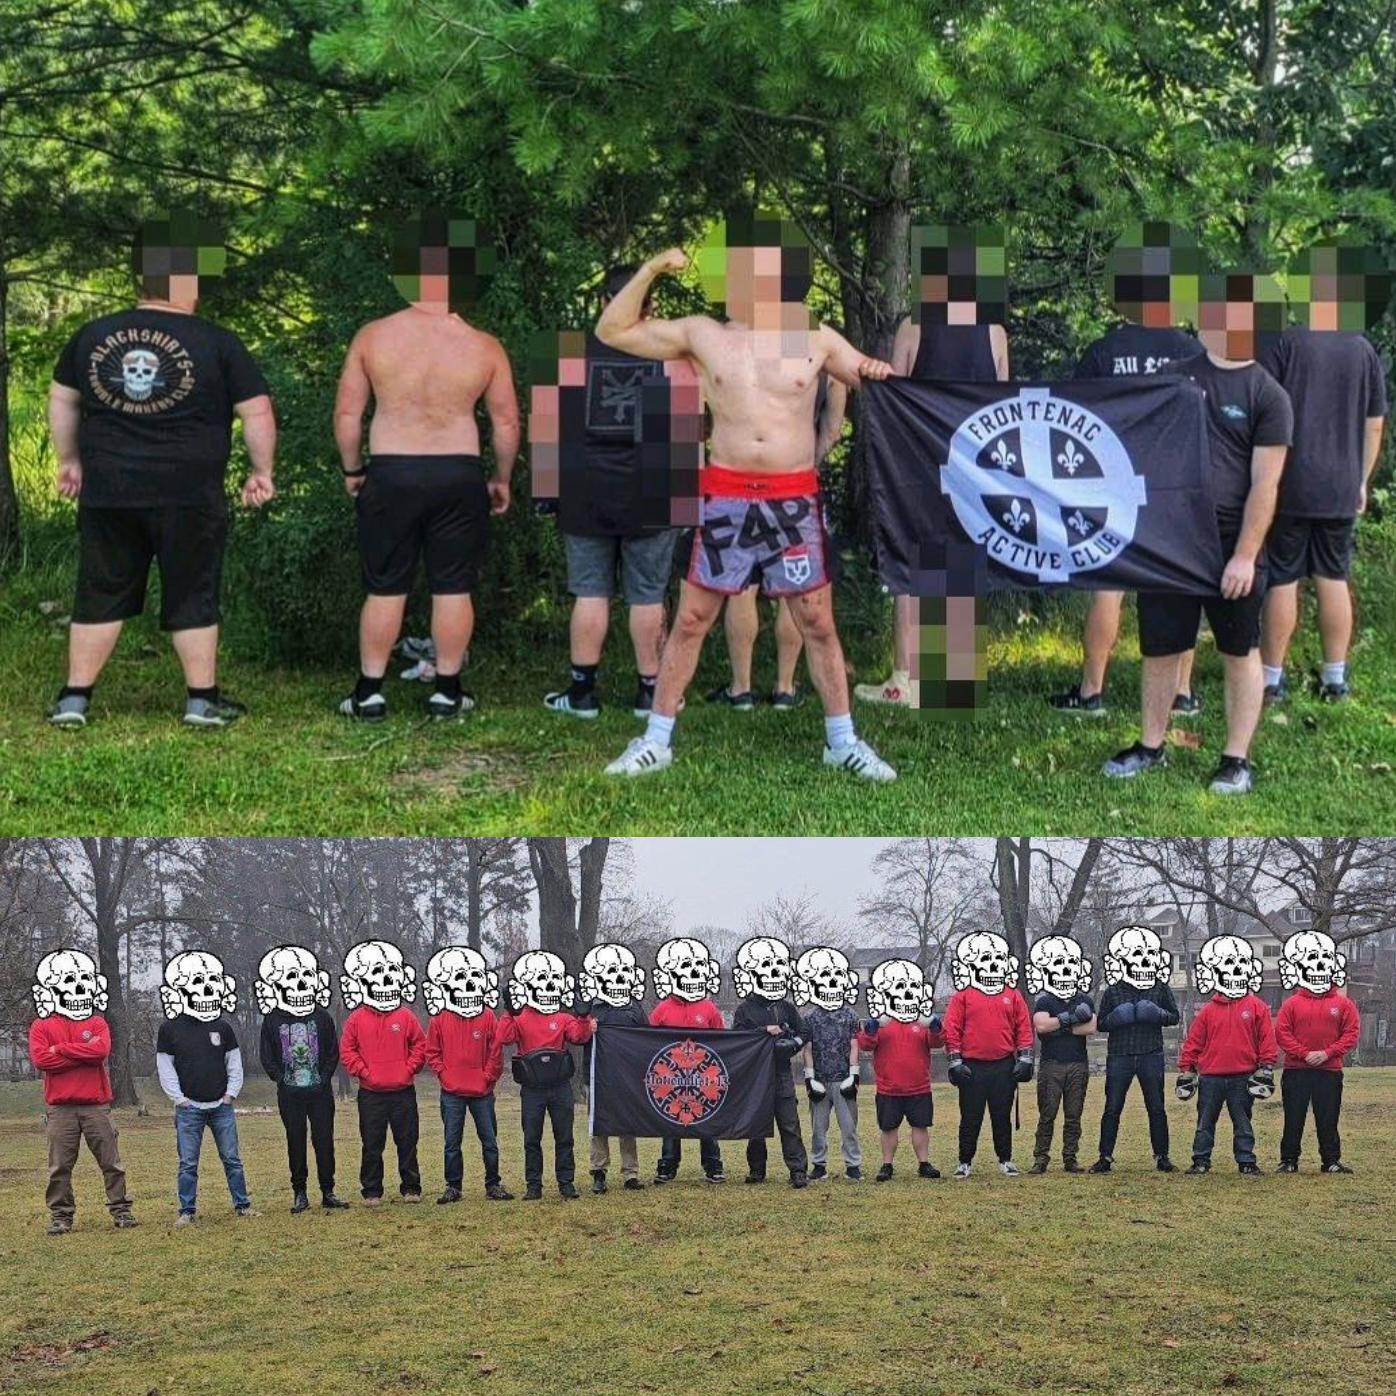 Nationalist-13 with Frontenac Active Club (top) and Toronto Fitness Club (bottom)